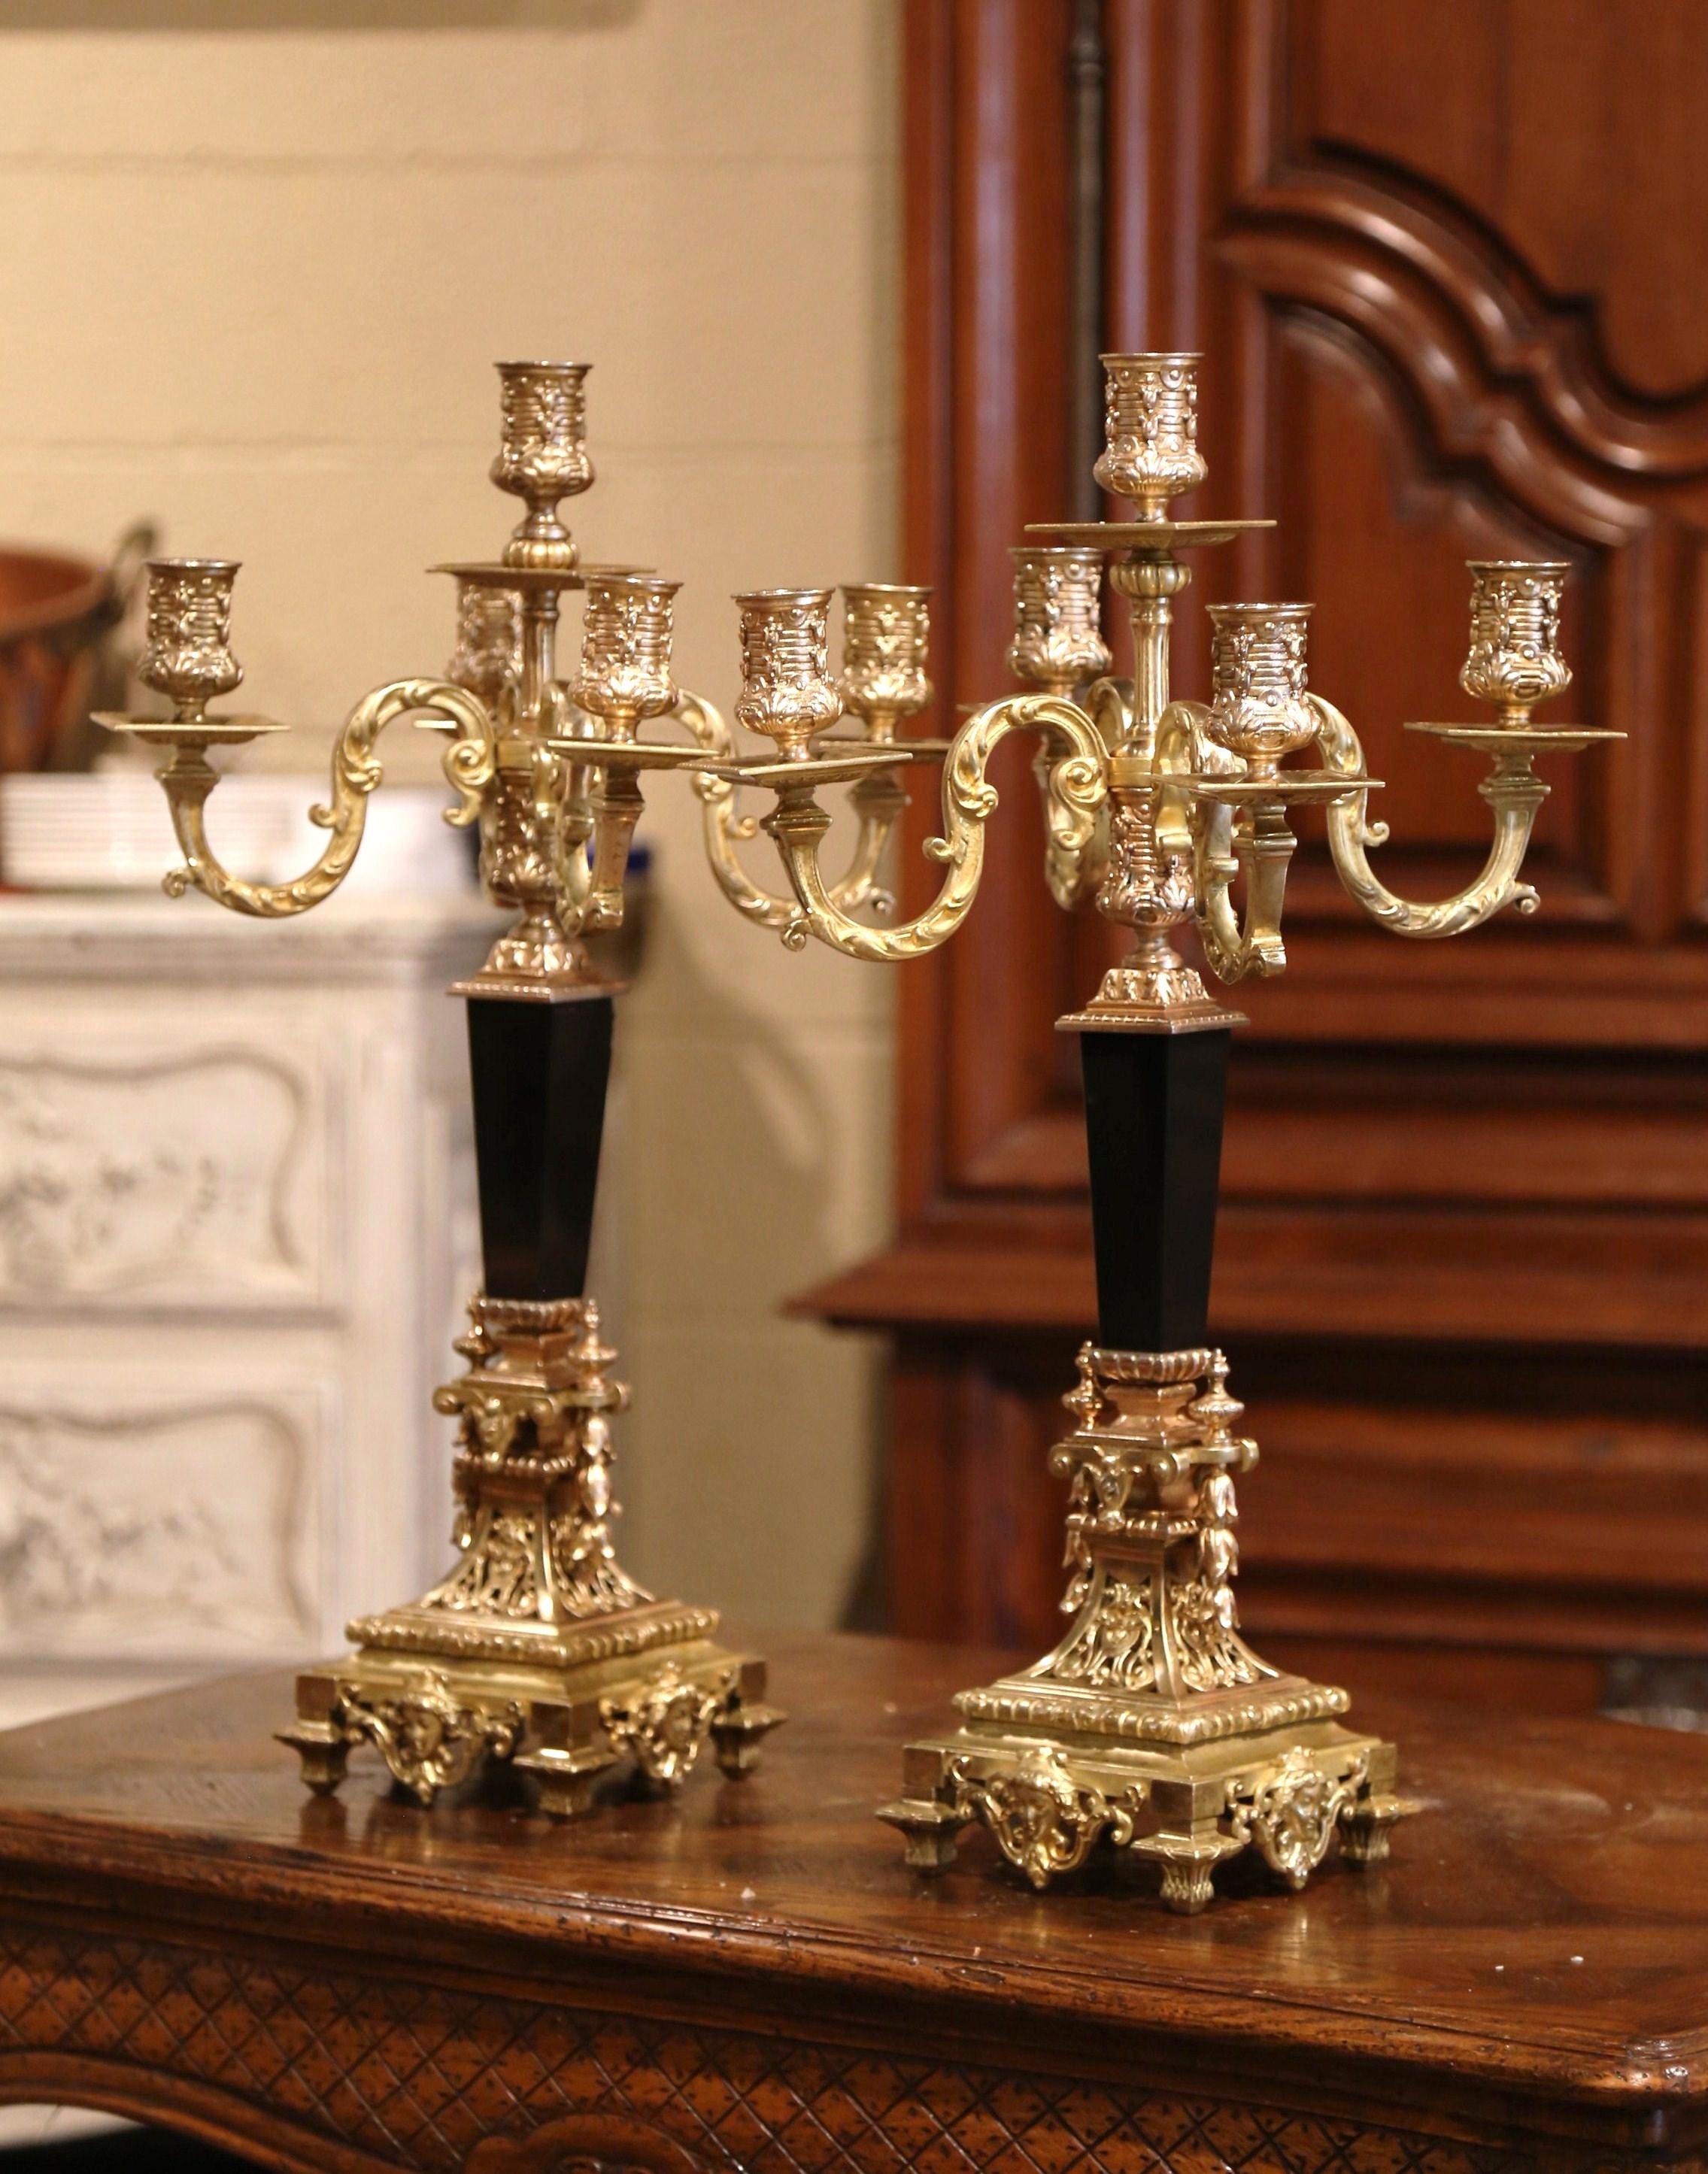 Decorate a mantel or a dining room table with this elegant pair of antique candle holders; crafted in France circa 1870, each 